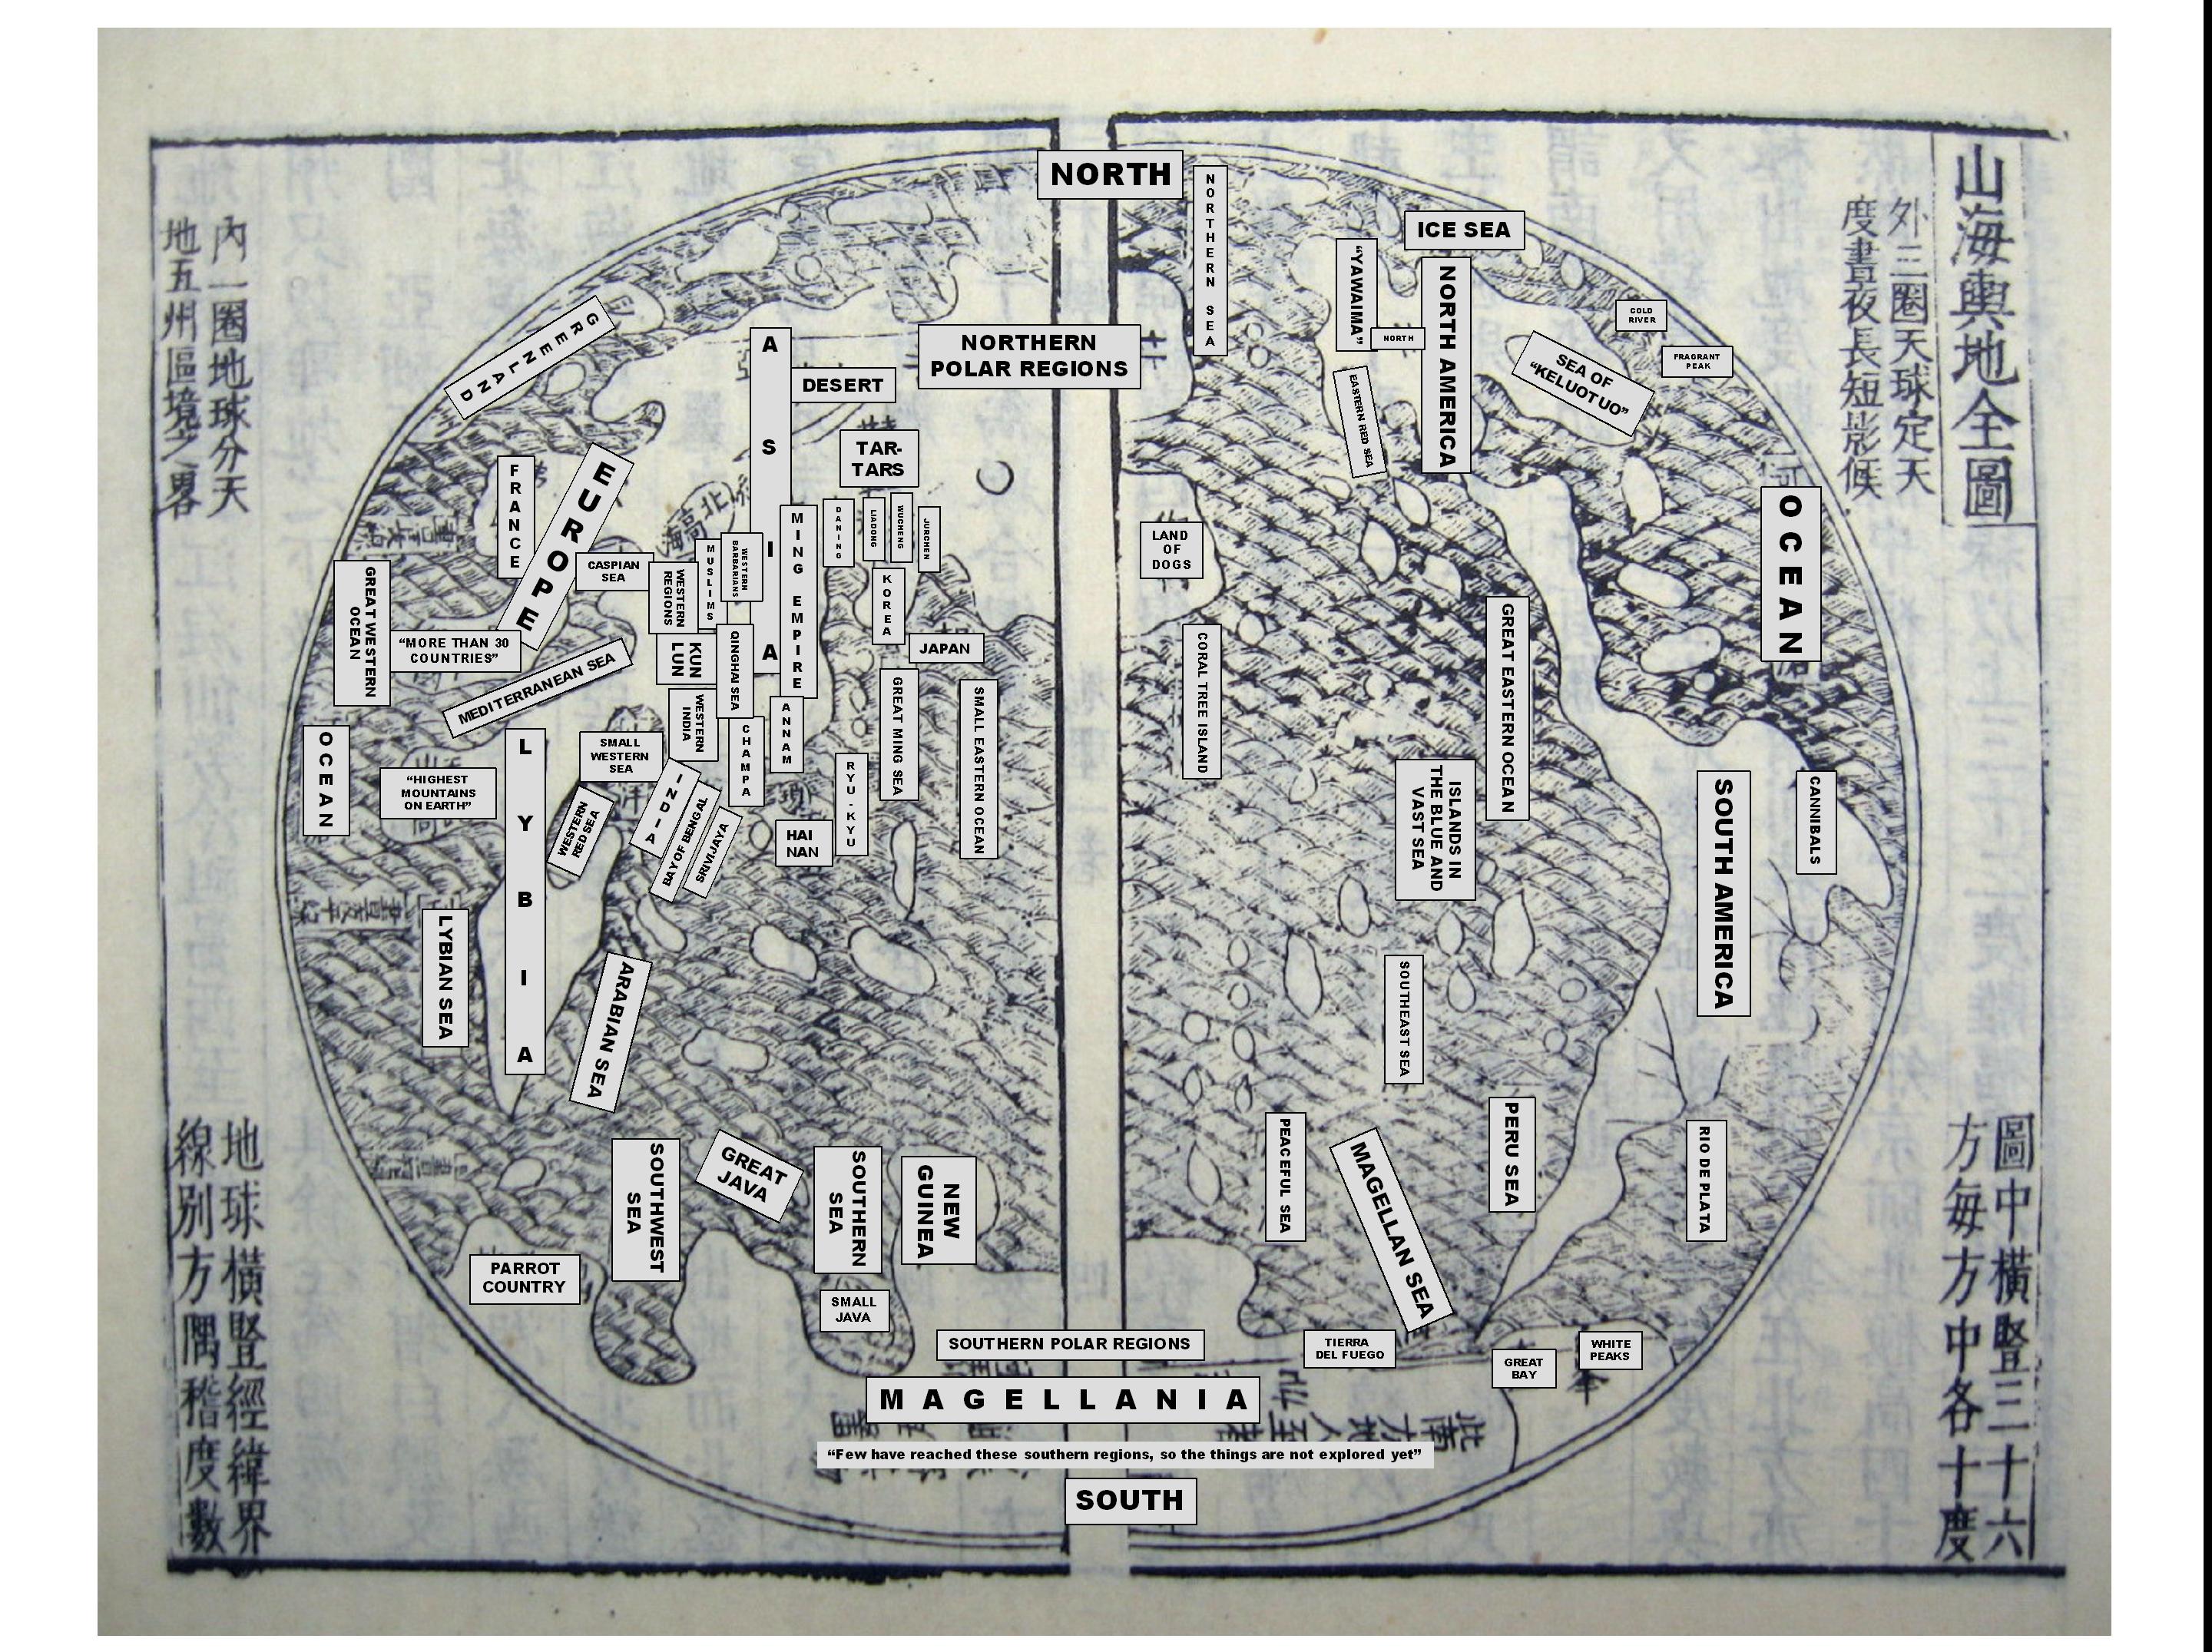 Res Obscura Early Chinese World Maps